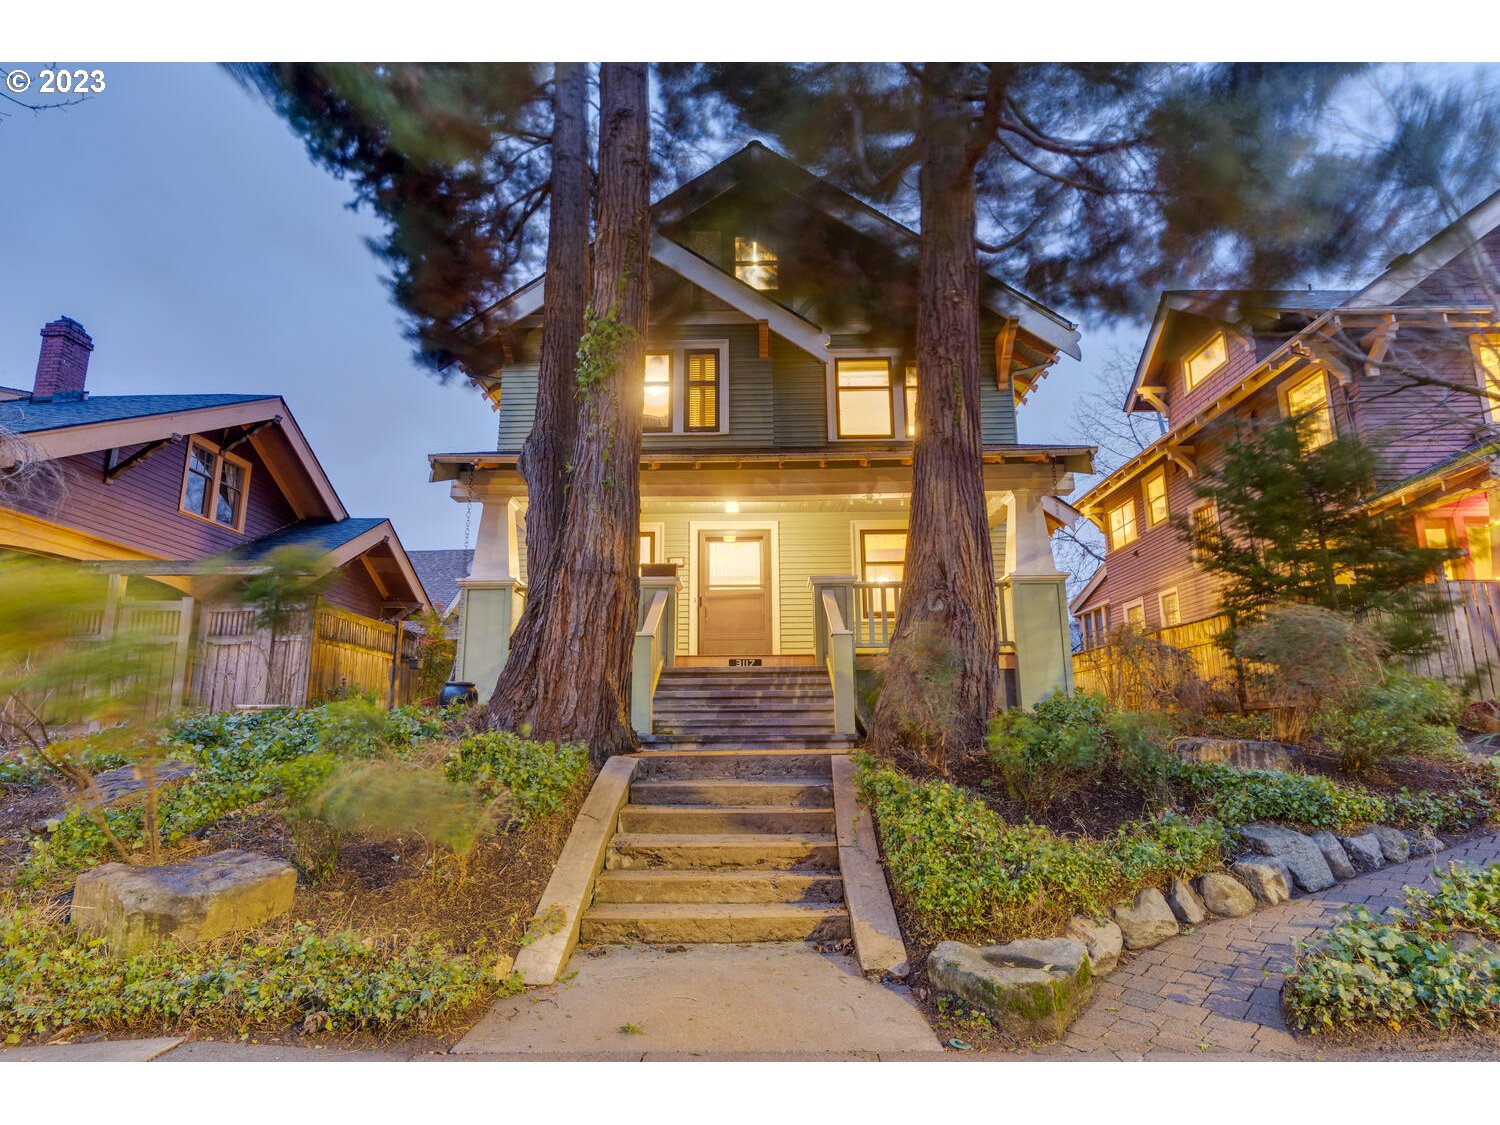 Portland classic adorned w/big front porch, majestic trees & exquisite Victorian architecture. Built in 1909, this special home retains its original interior details: built-ins, natural wood finishes, crown molding, high ceilings, hardwoods, beautiful fixtures, fireplace & much more. 3 large beds & 2 baths, 1 w/luxurious clawfoot tub. 2 decks out to nice-sized backyard. Tons of potential in unfinished attic & basement. Newer roof. Easy jaunt to the excitement of Division & Clinton! [Home Energy Score = 1. HES Report at https://rpt.greenbuildingregistry.com/hes/OR10207002]